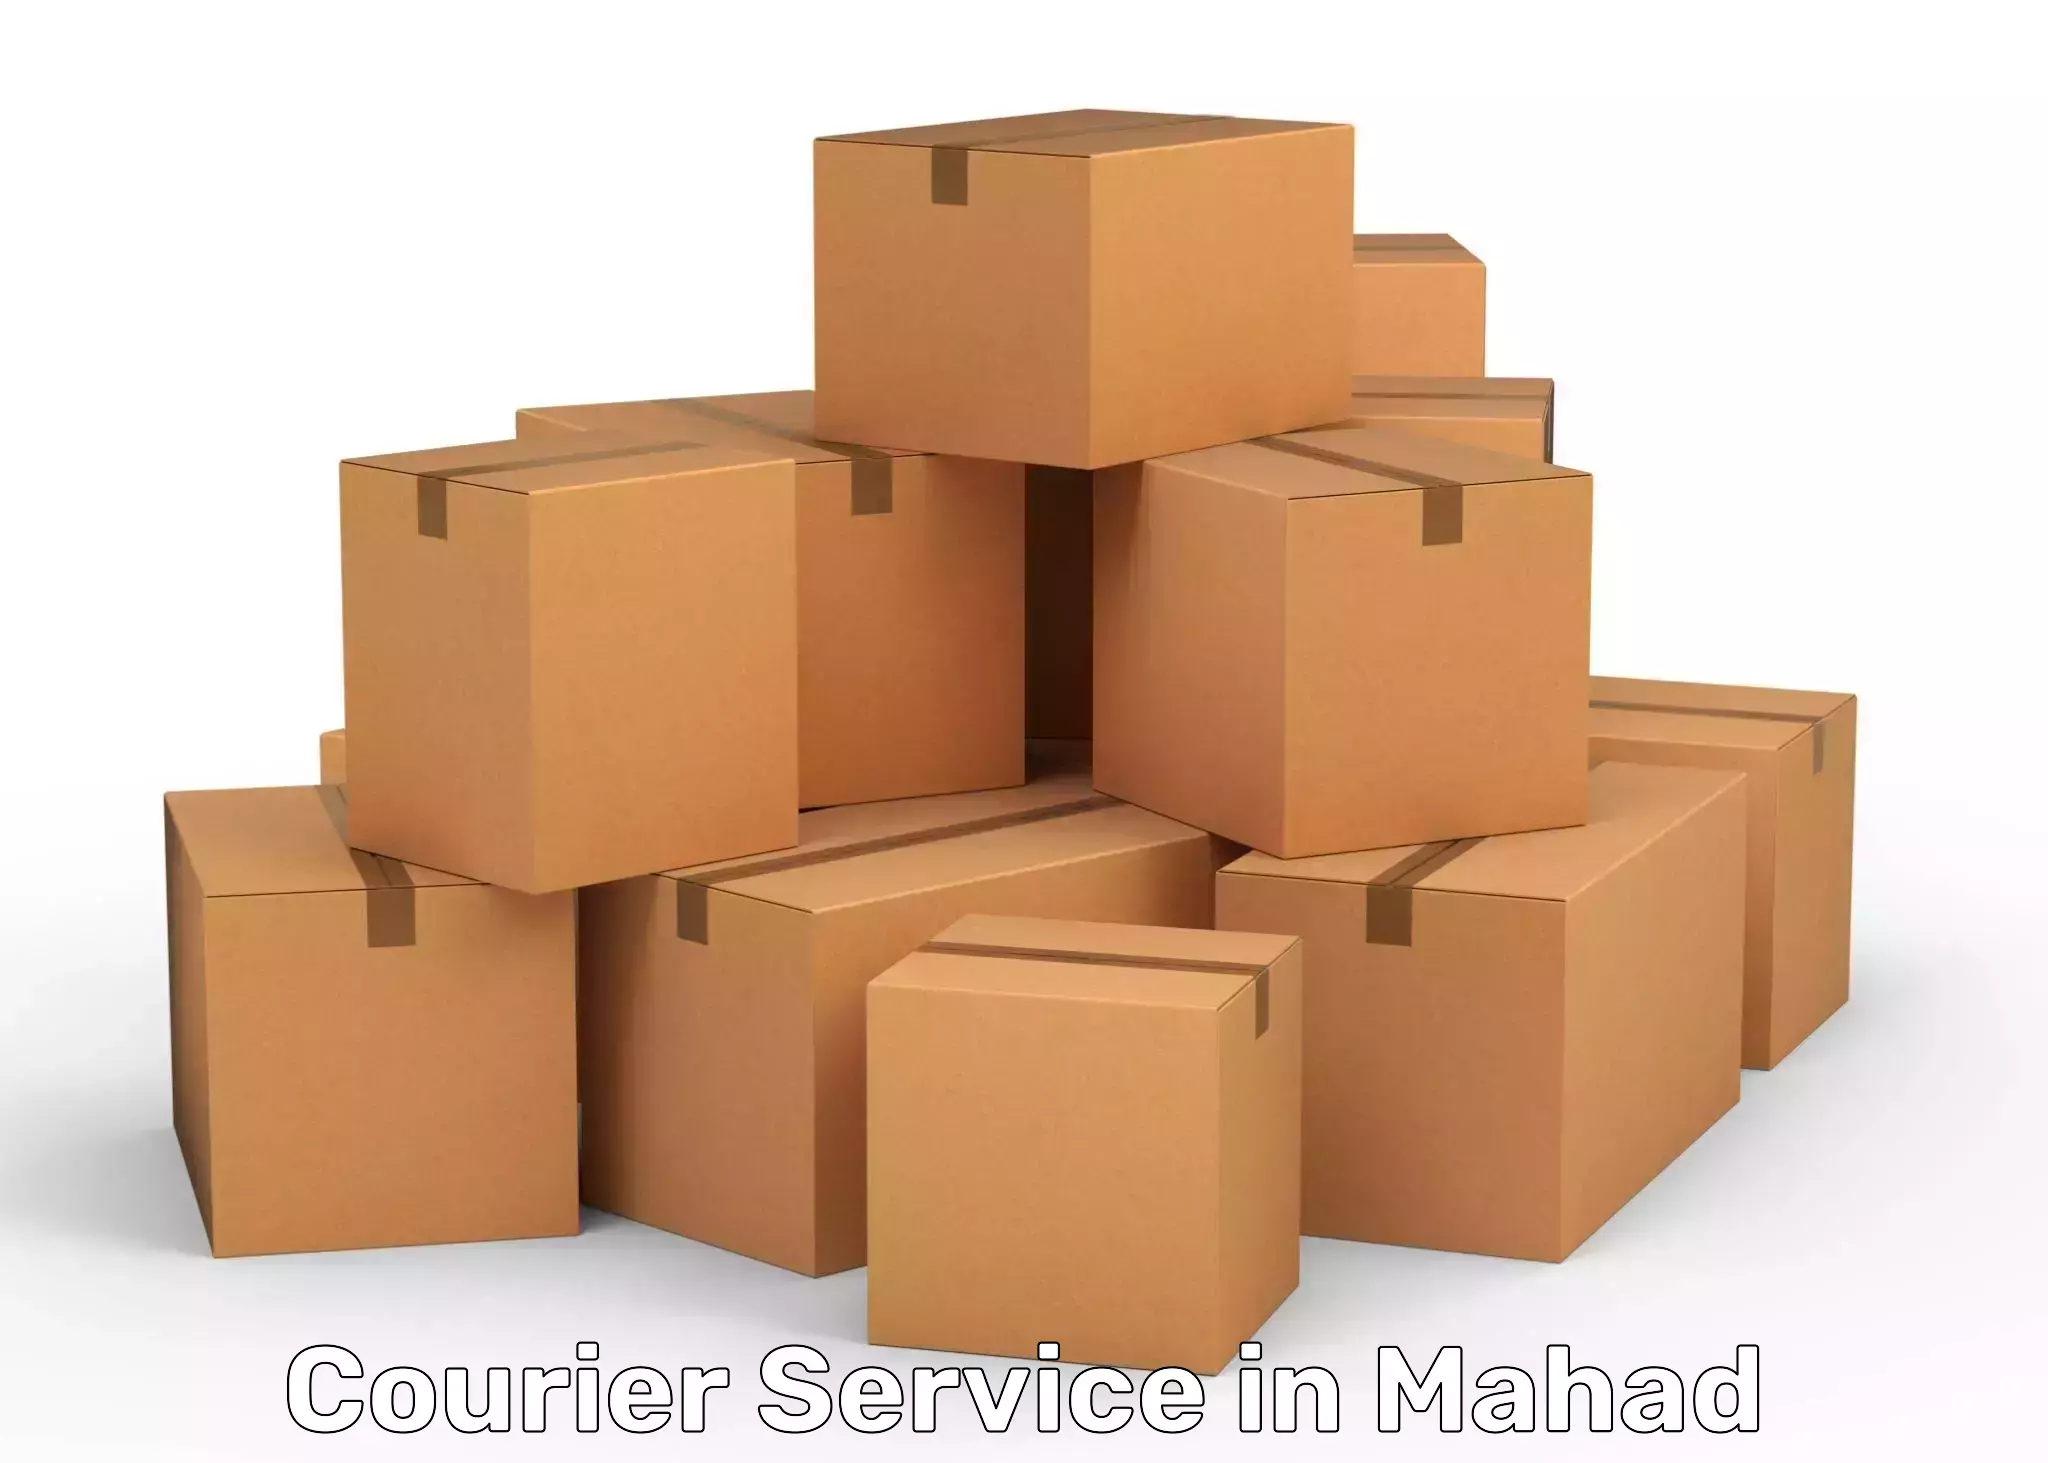 On-demand delivery in Mahad